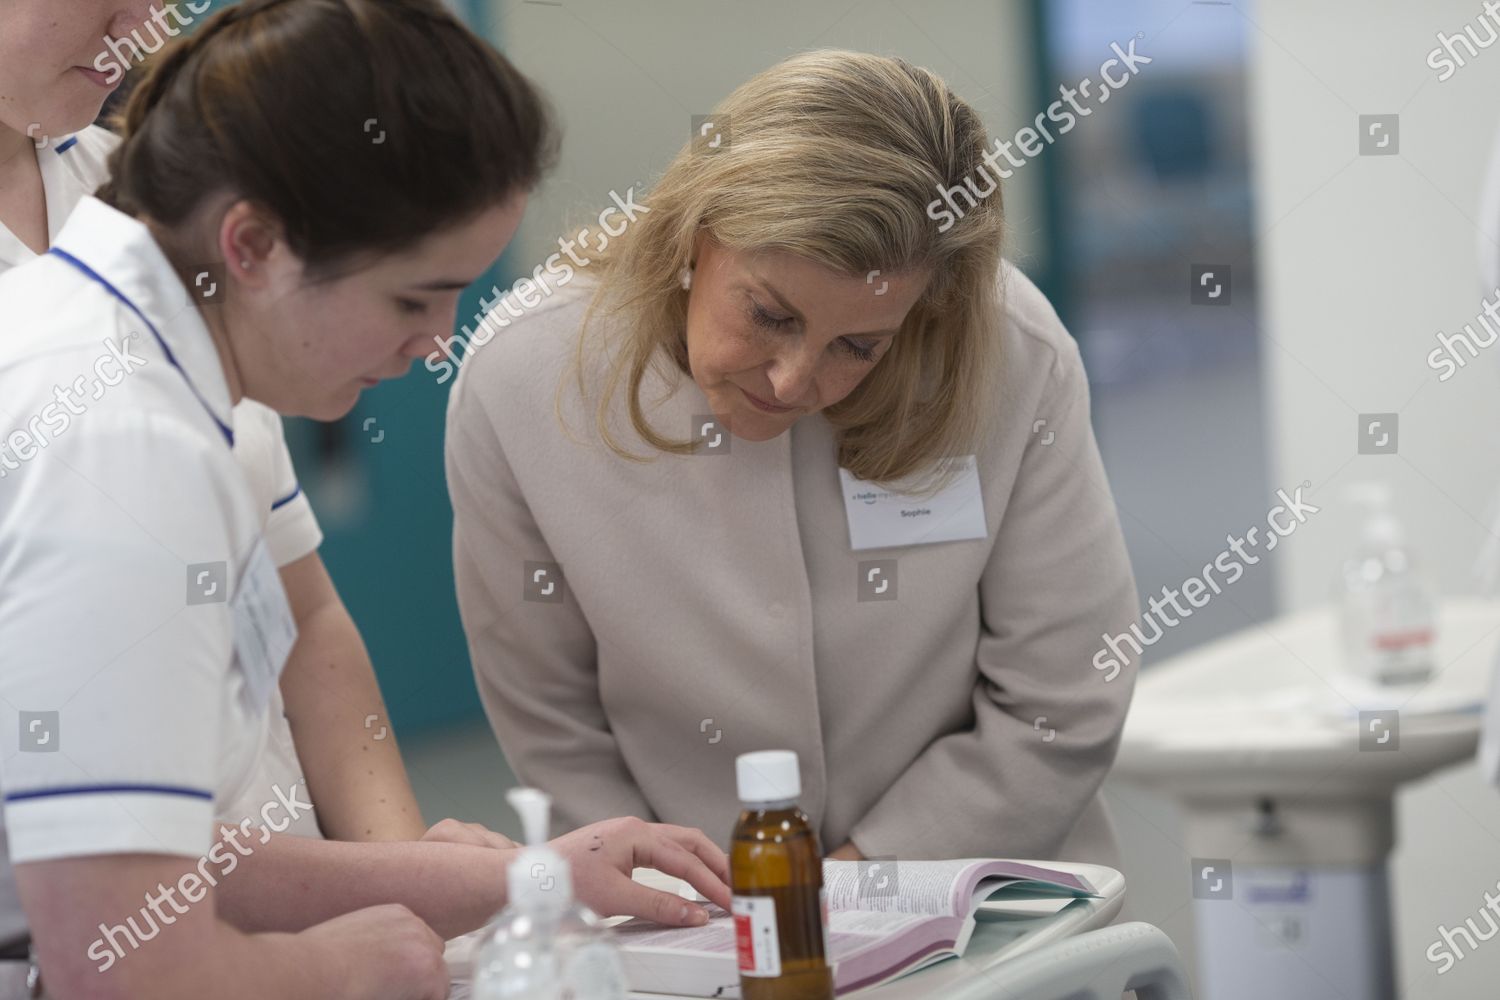 sophie-countess-of-wessex-opens-new-health-sciences-institute-university-of-surrey-guildford-uk-shutterstock-editorial-10542421ab.jpg